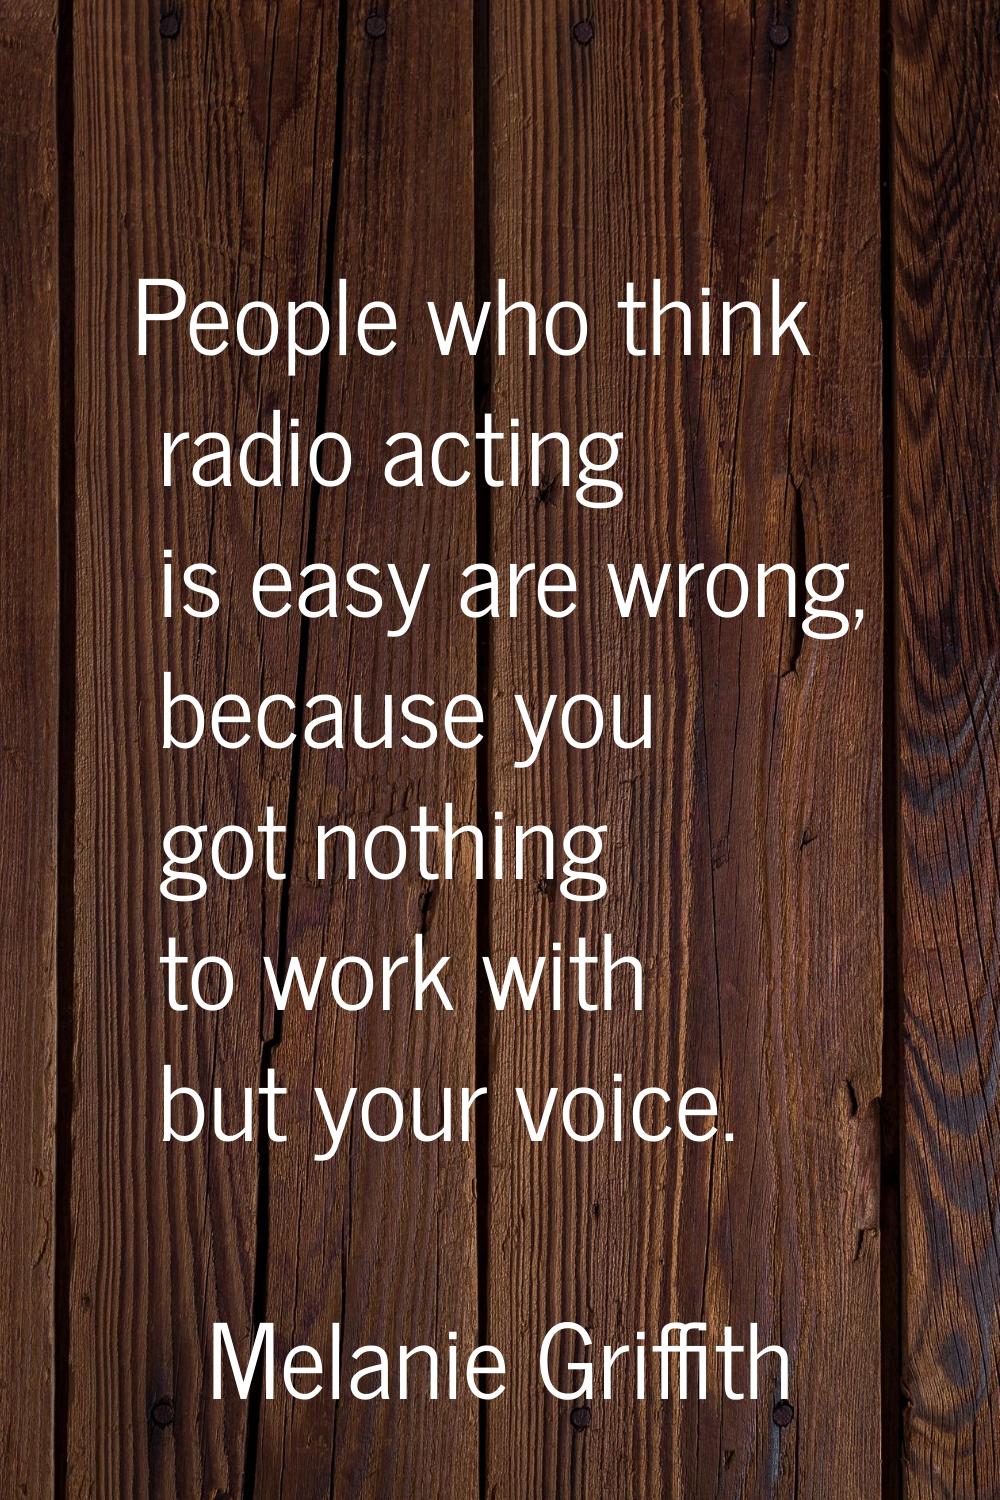 People who think radio acting is easy are wrong, because you got nothing to work with but your voic